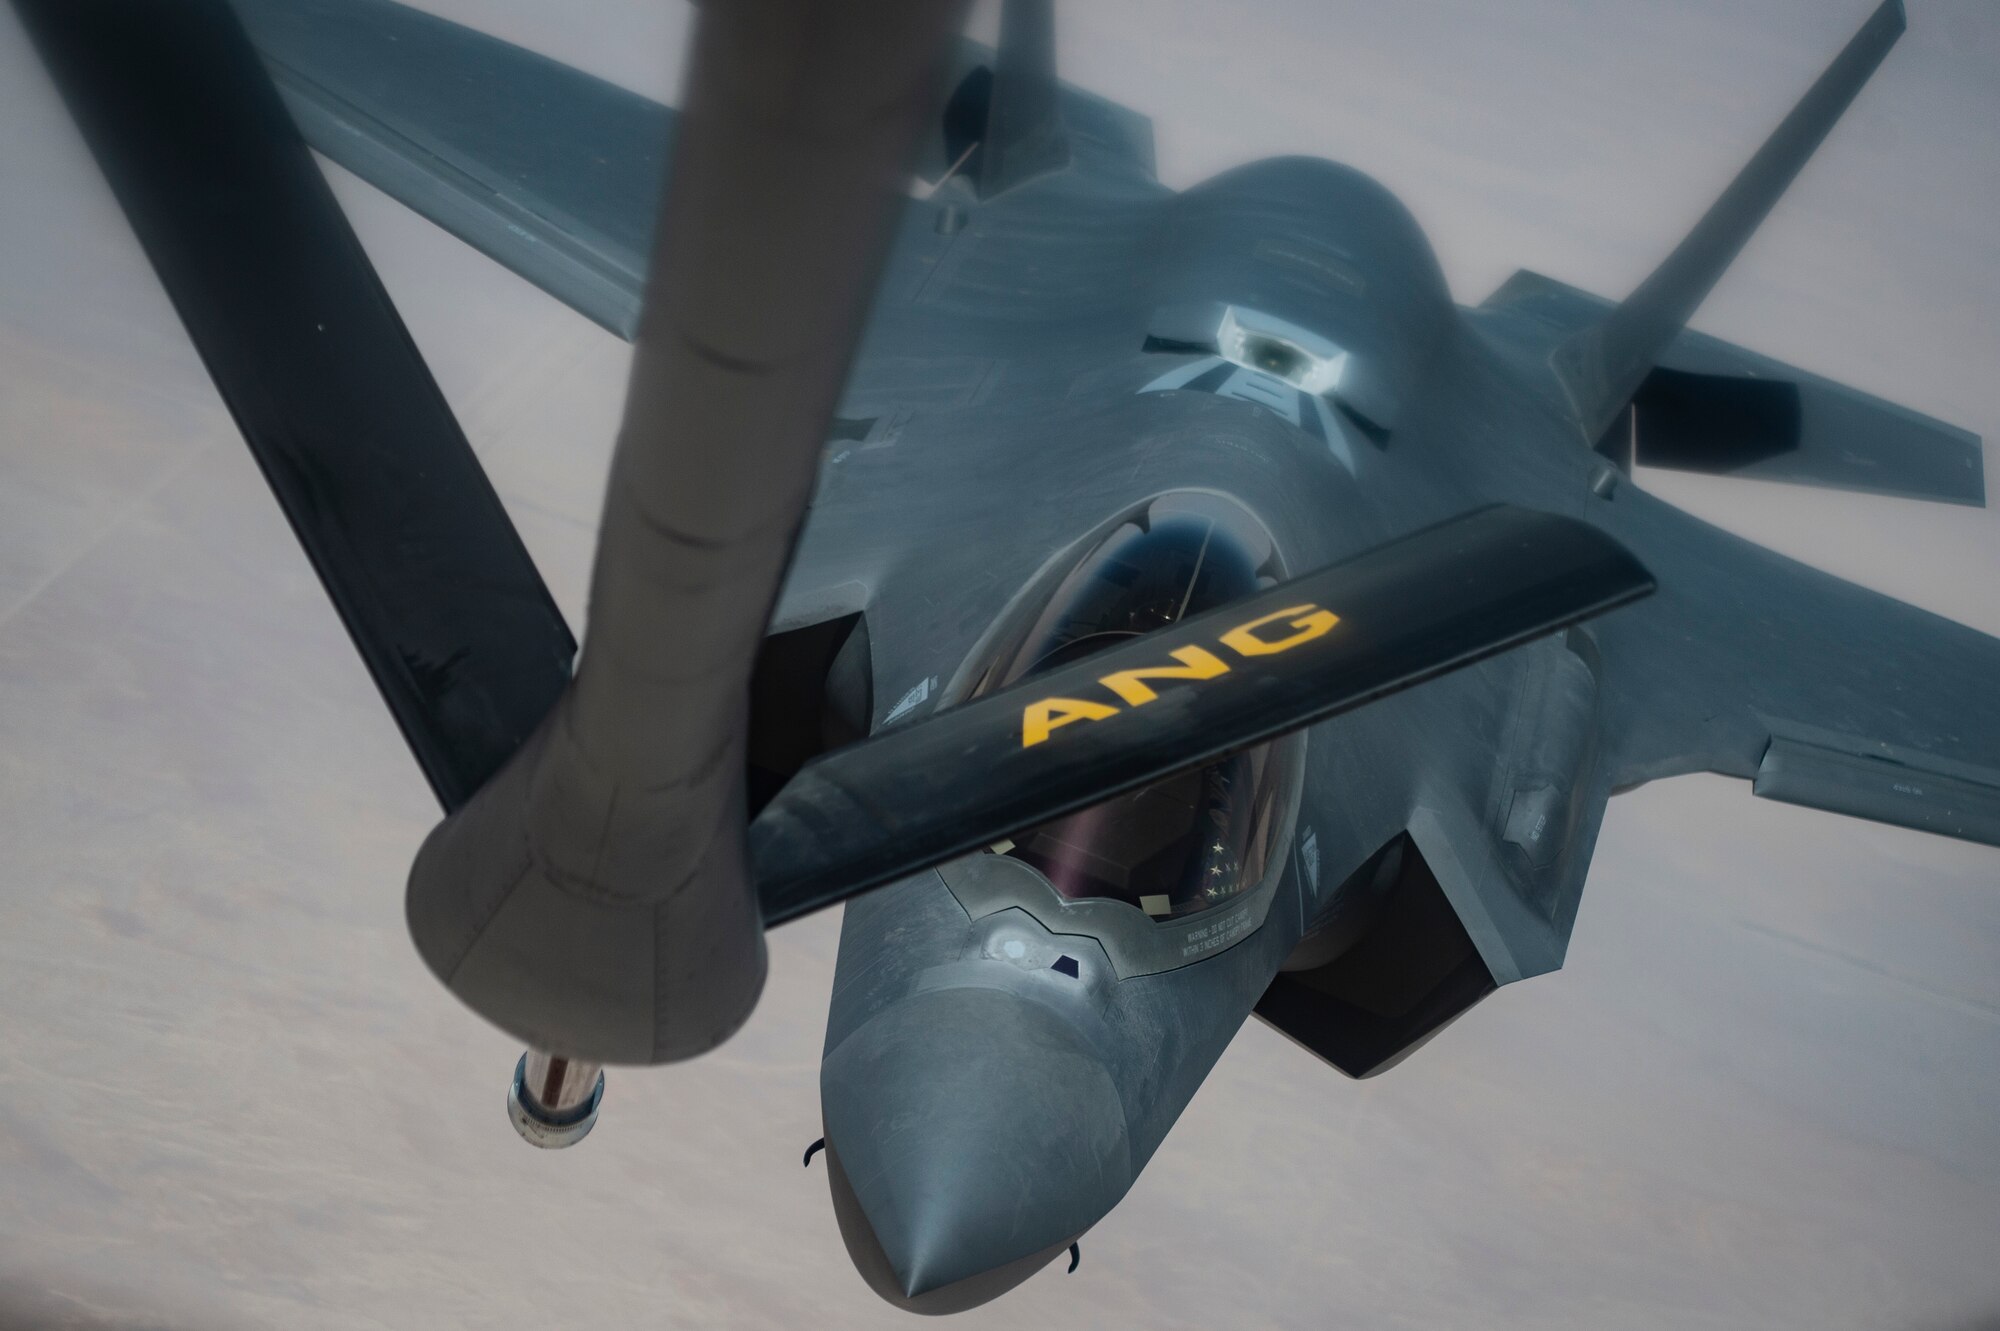 A U.S. Air Force KC-135 Stratotanker assigned to the 379th Air Expeditionary Wing prepares to refuel a U.S. Air Force F-35A Lightning II assigned to the 380th AEW over Southwest Asia, July 25, 2020. Through joint exercises or direct operations, the 380th Air Expeditionary Wing continues to strengthen relationships with regional and coalition partners to defend the region. (U.S. Air Force photo by Master Sgt. Larry E. Reid Jr.)